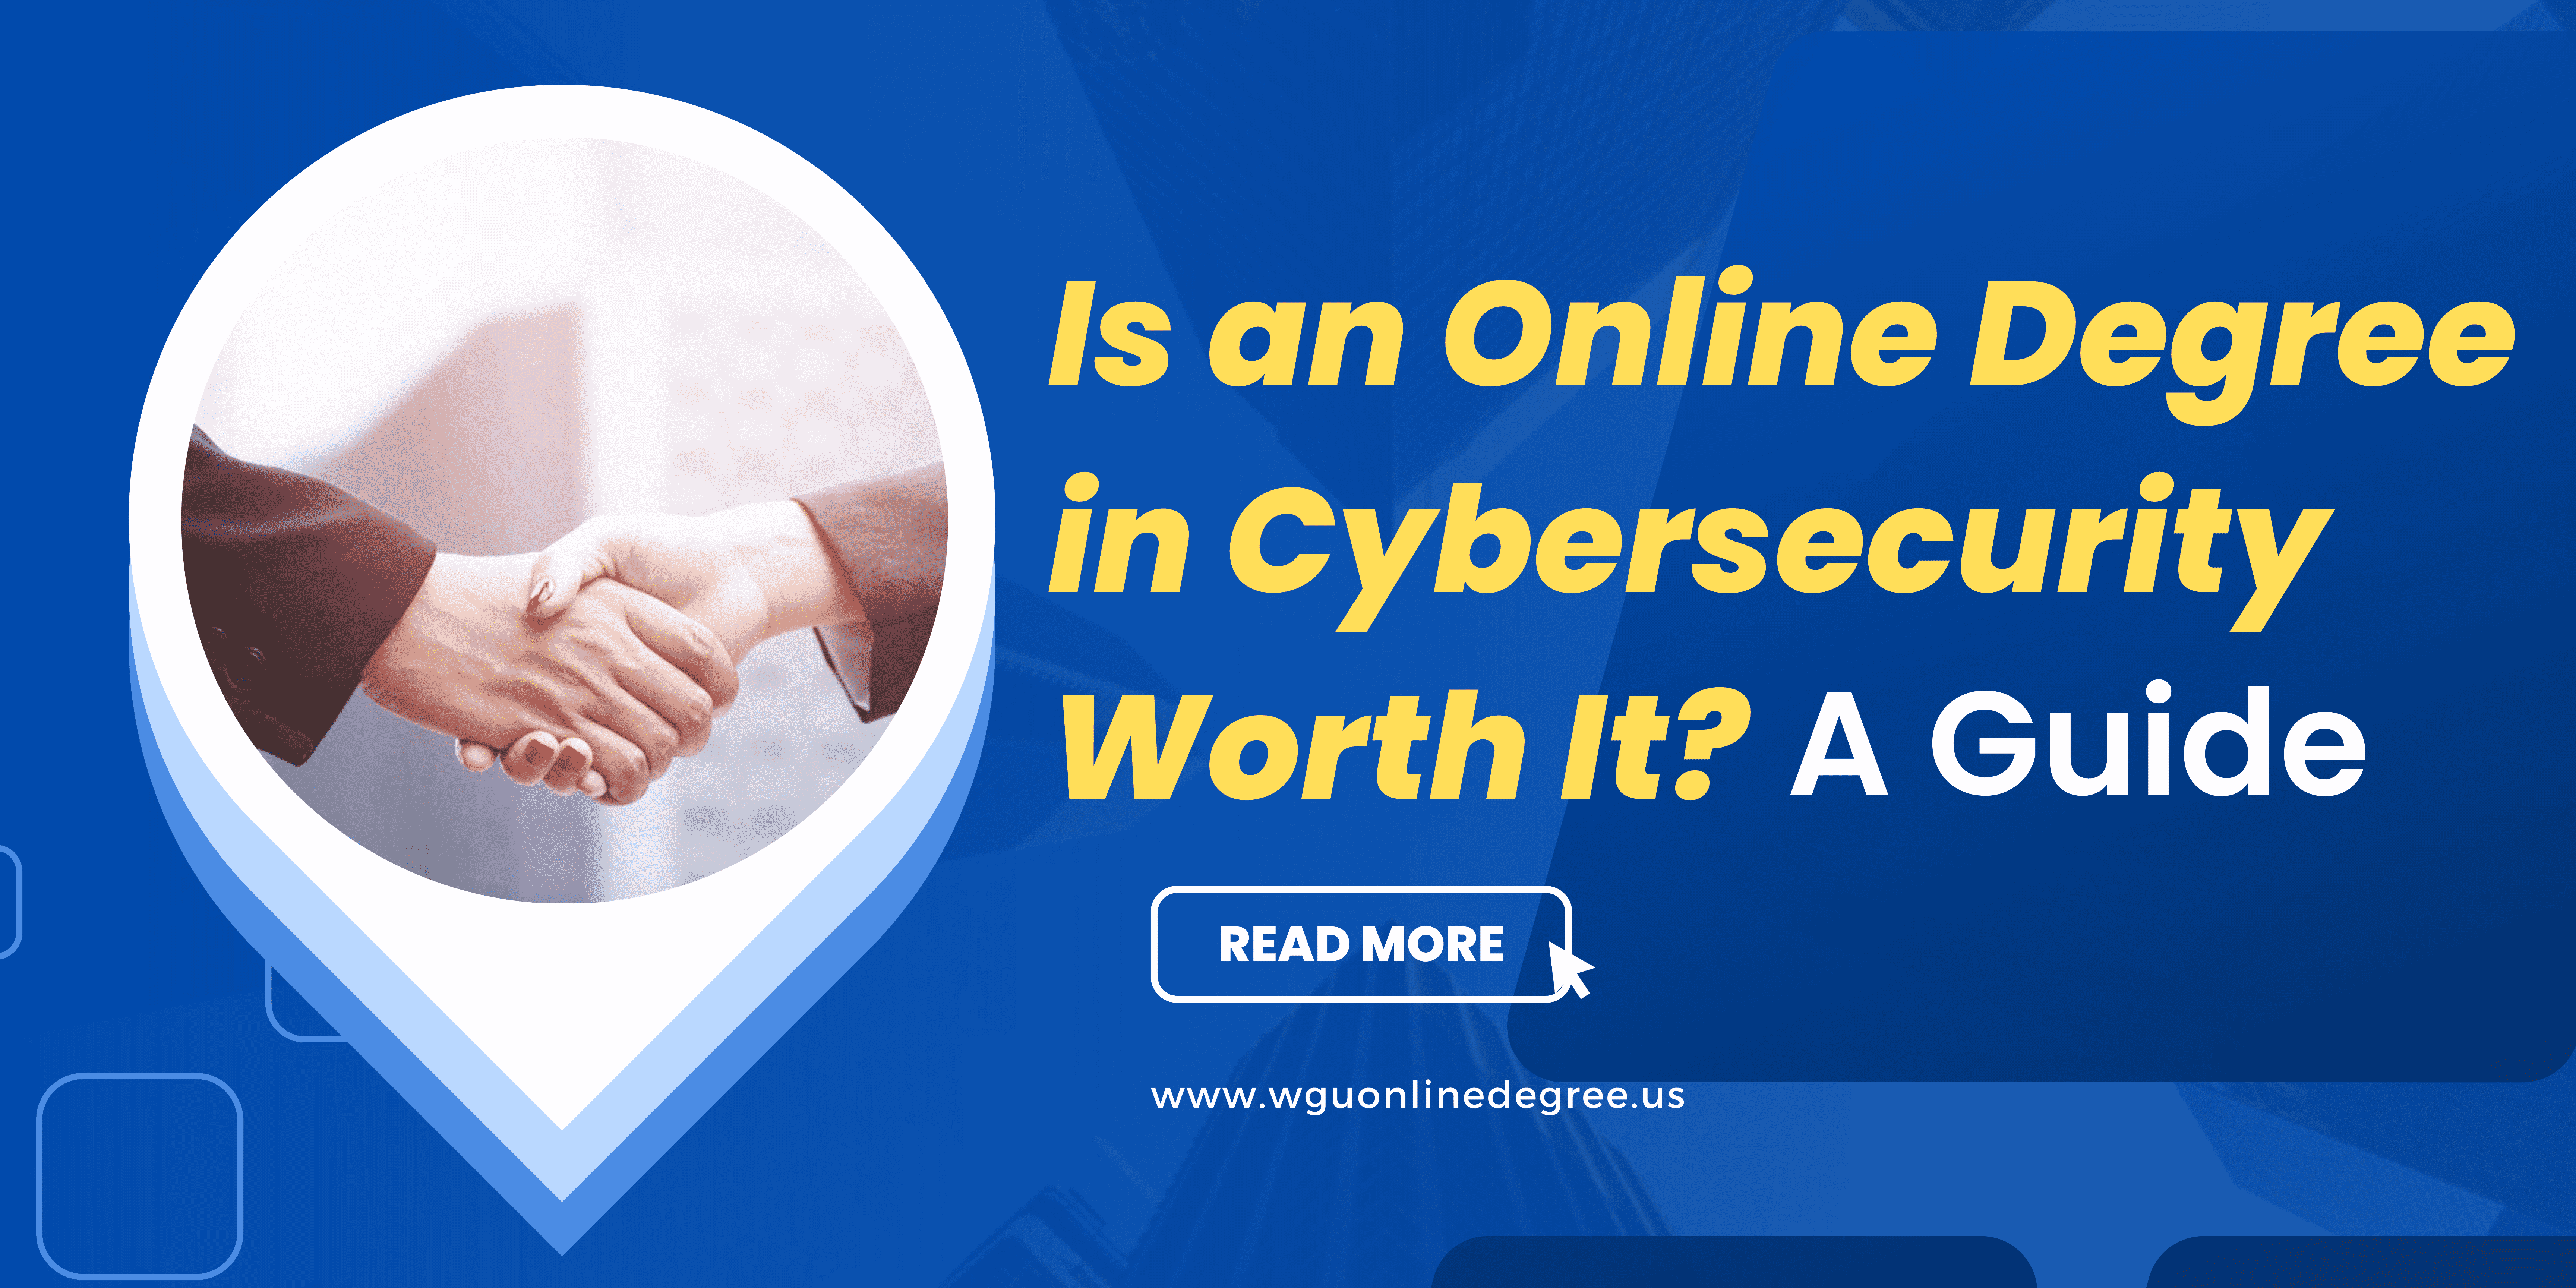 Is an Online Degree in Cybersecurity Worth It? A Guide